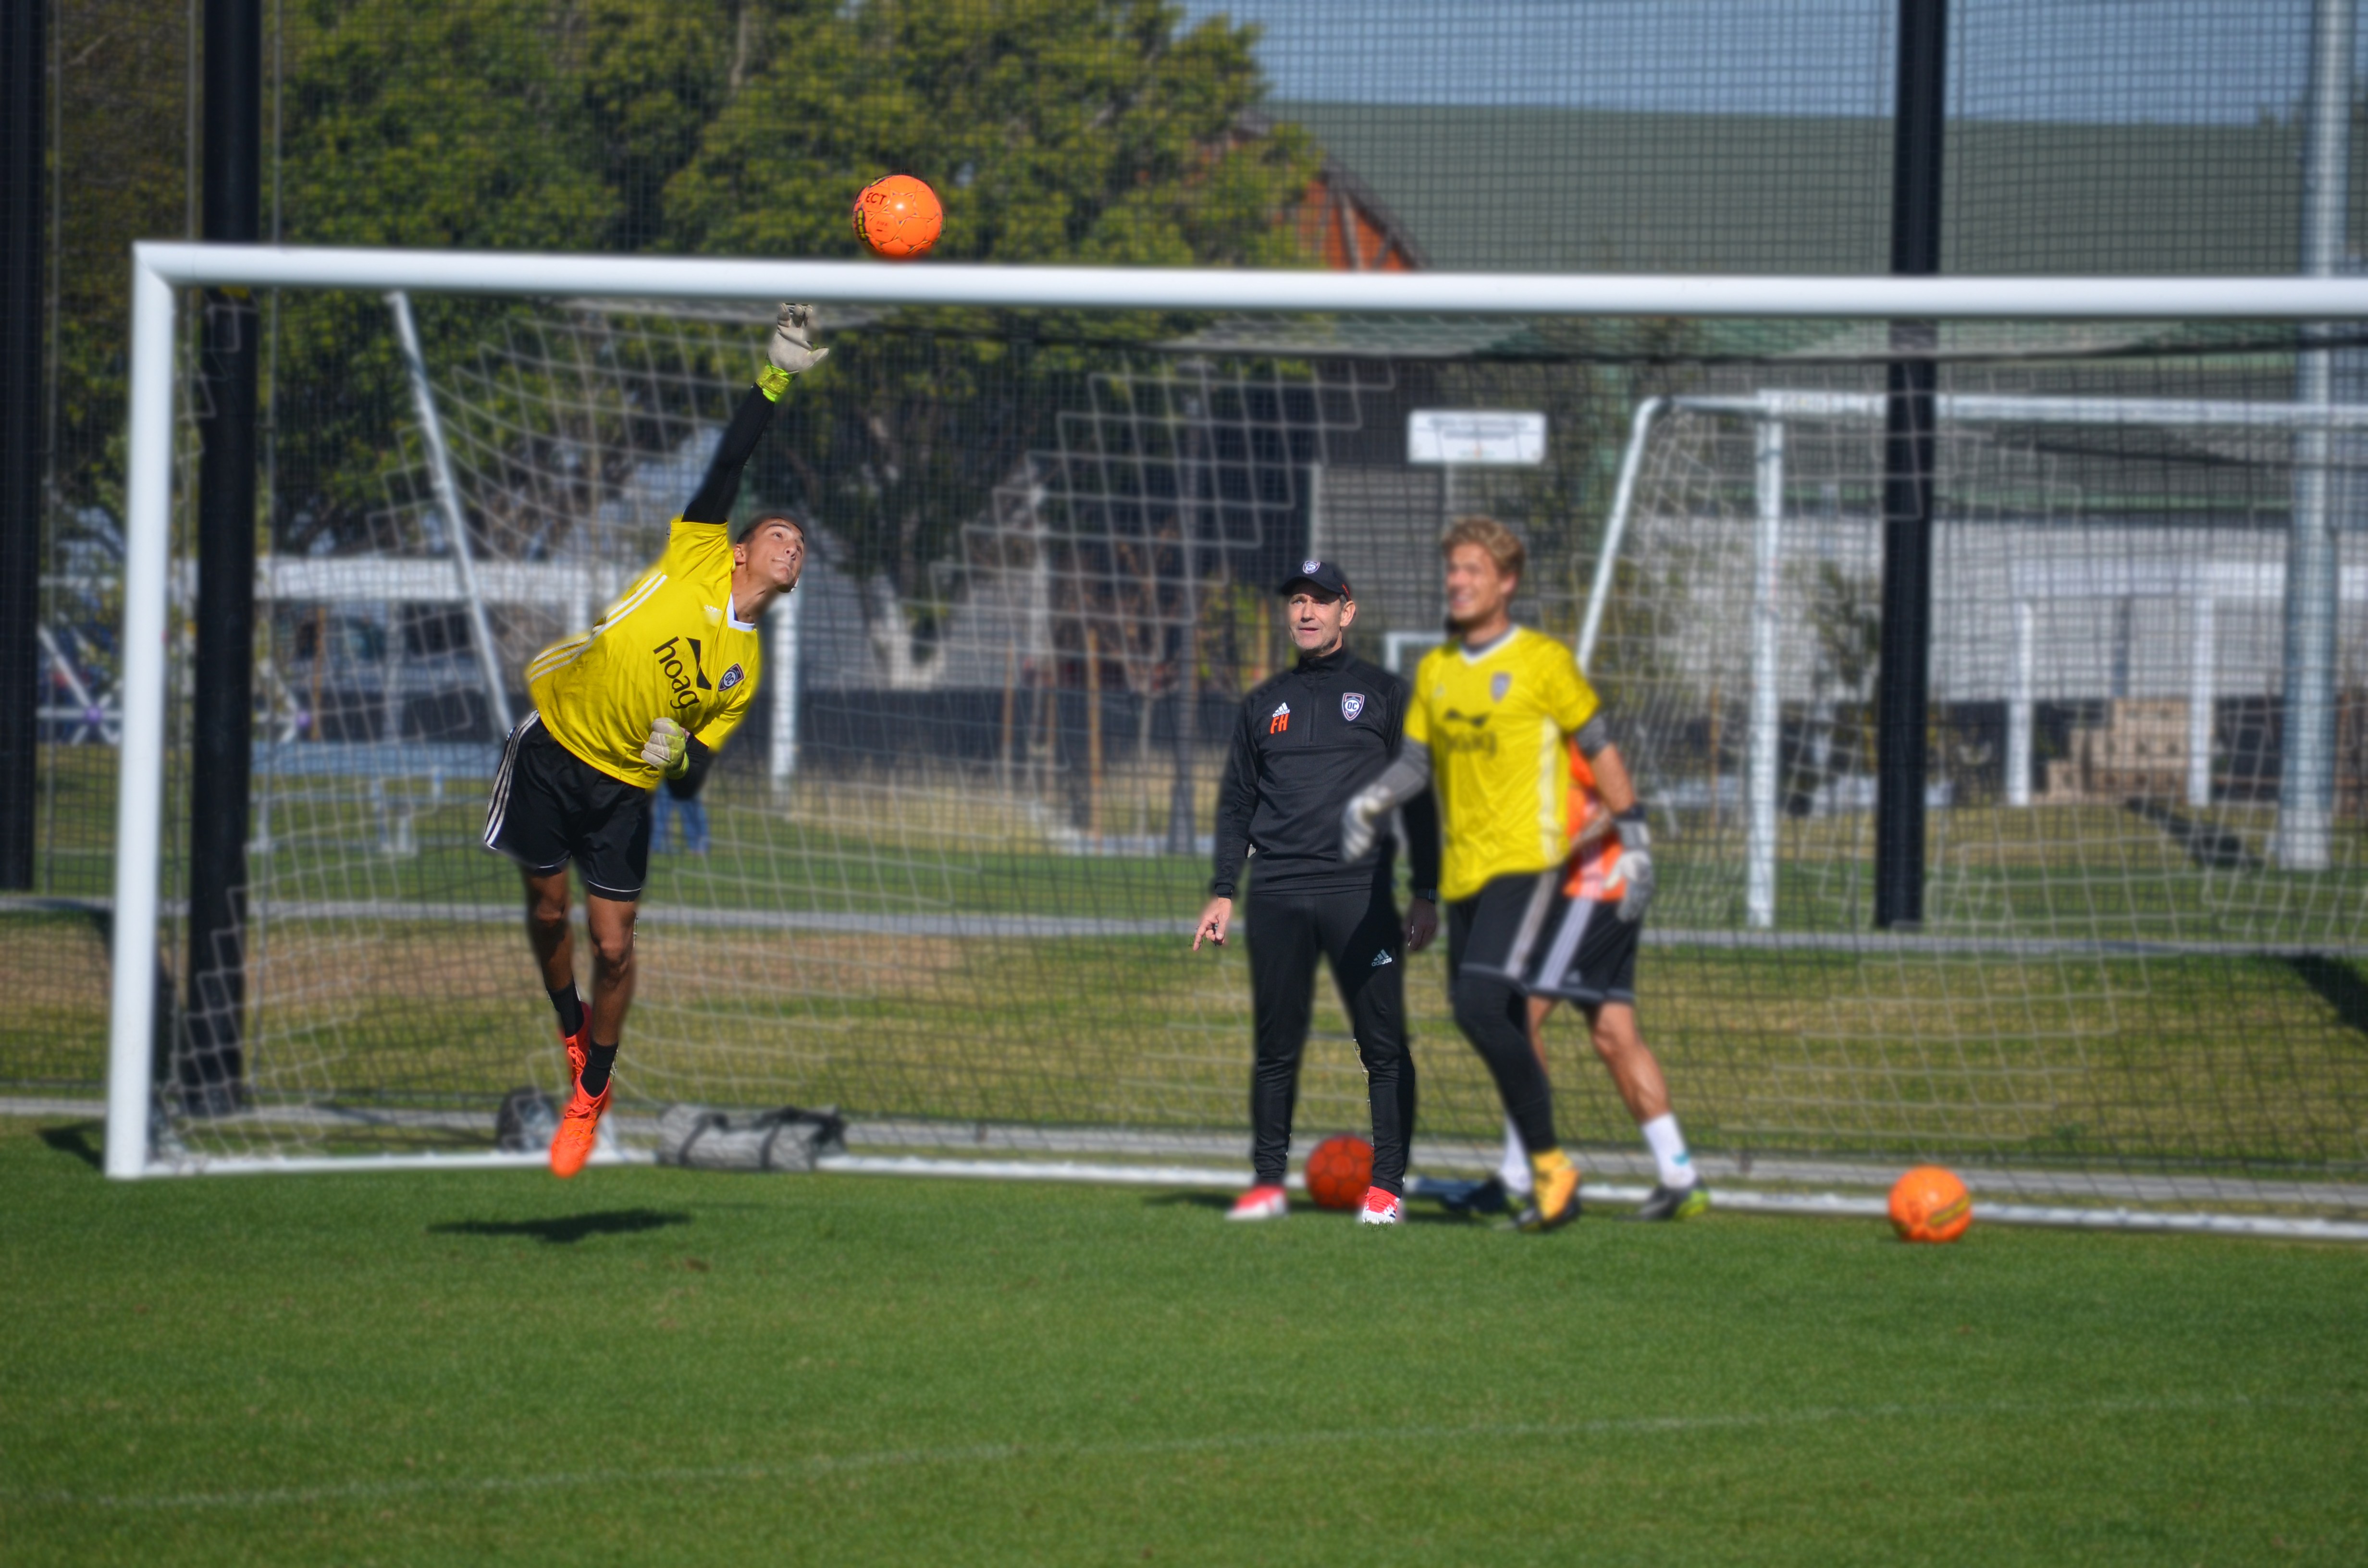 15-Year-Old Goalkeeper Aaron Cervantes Signs Professional Contract with USL’s Orange County SC